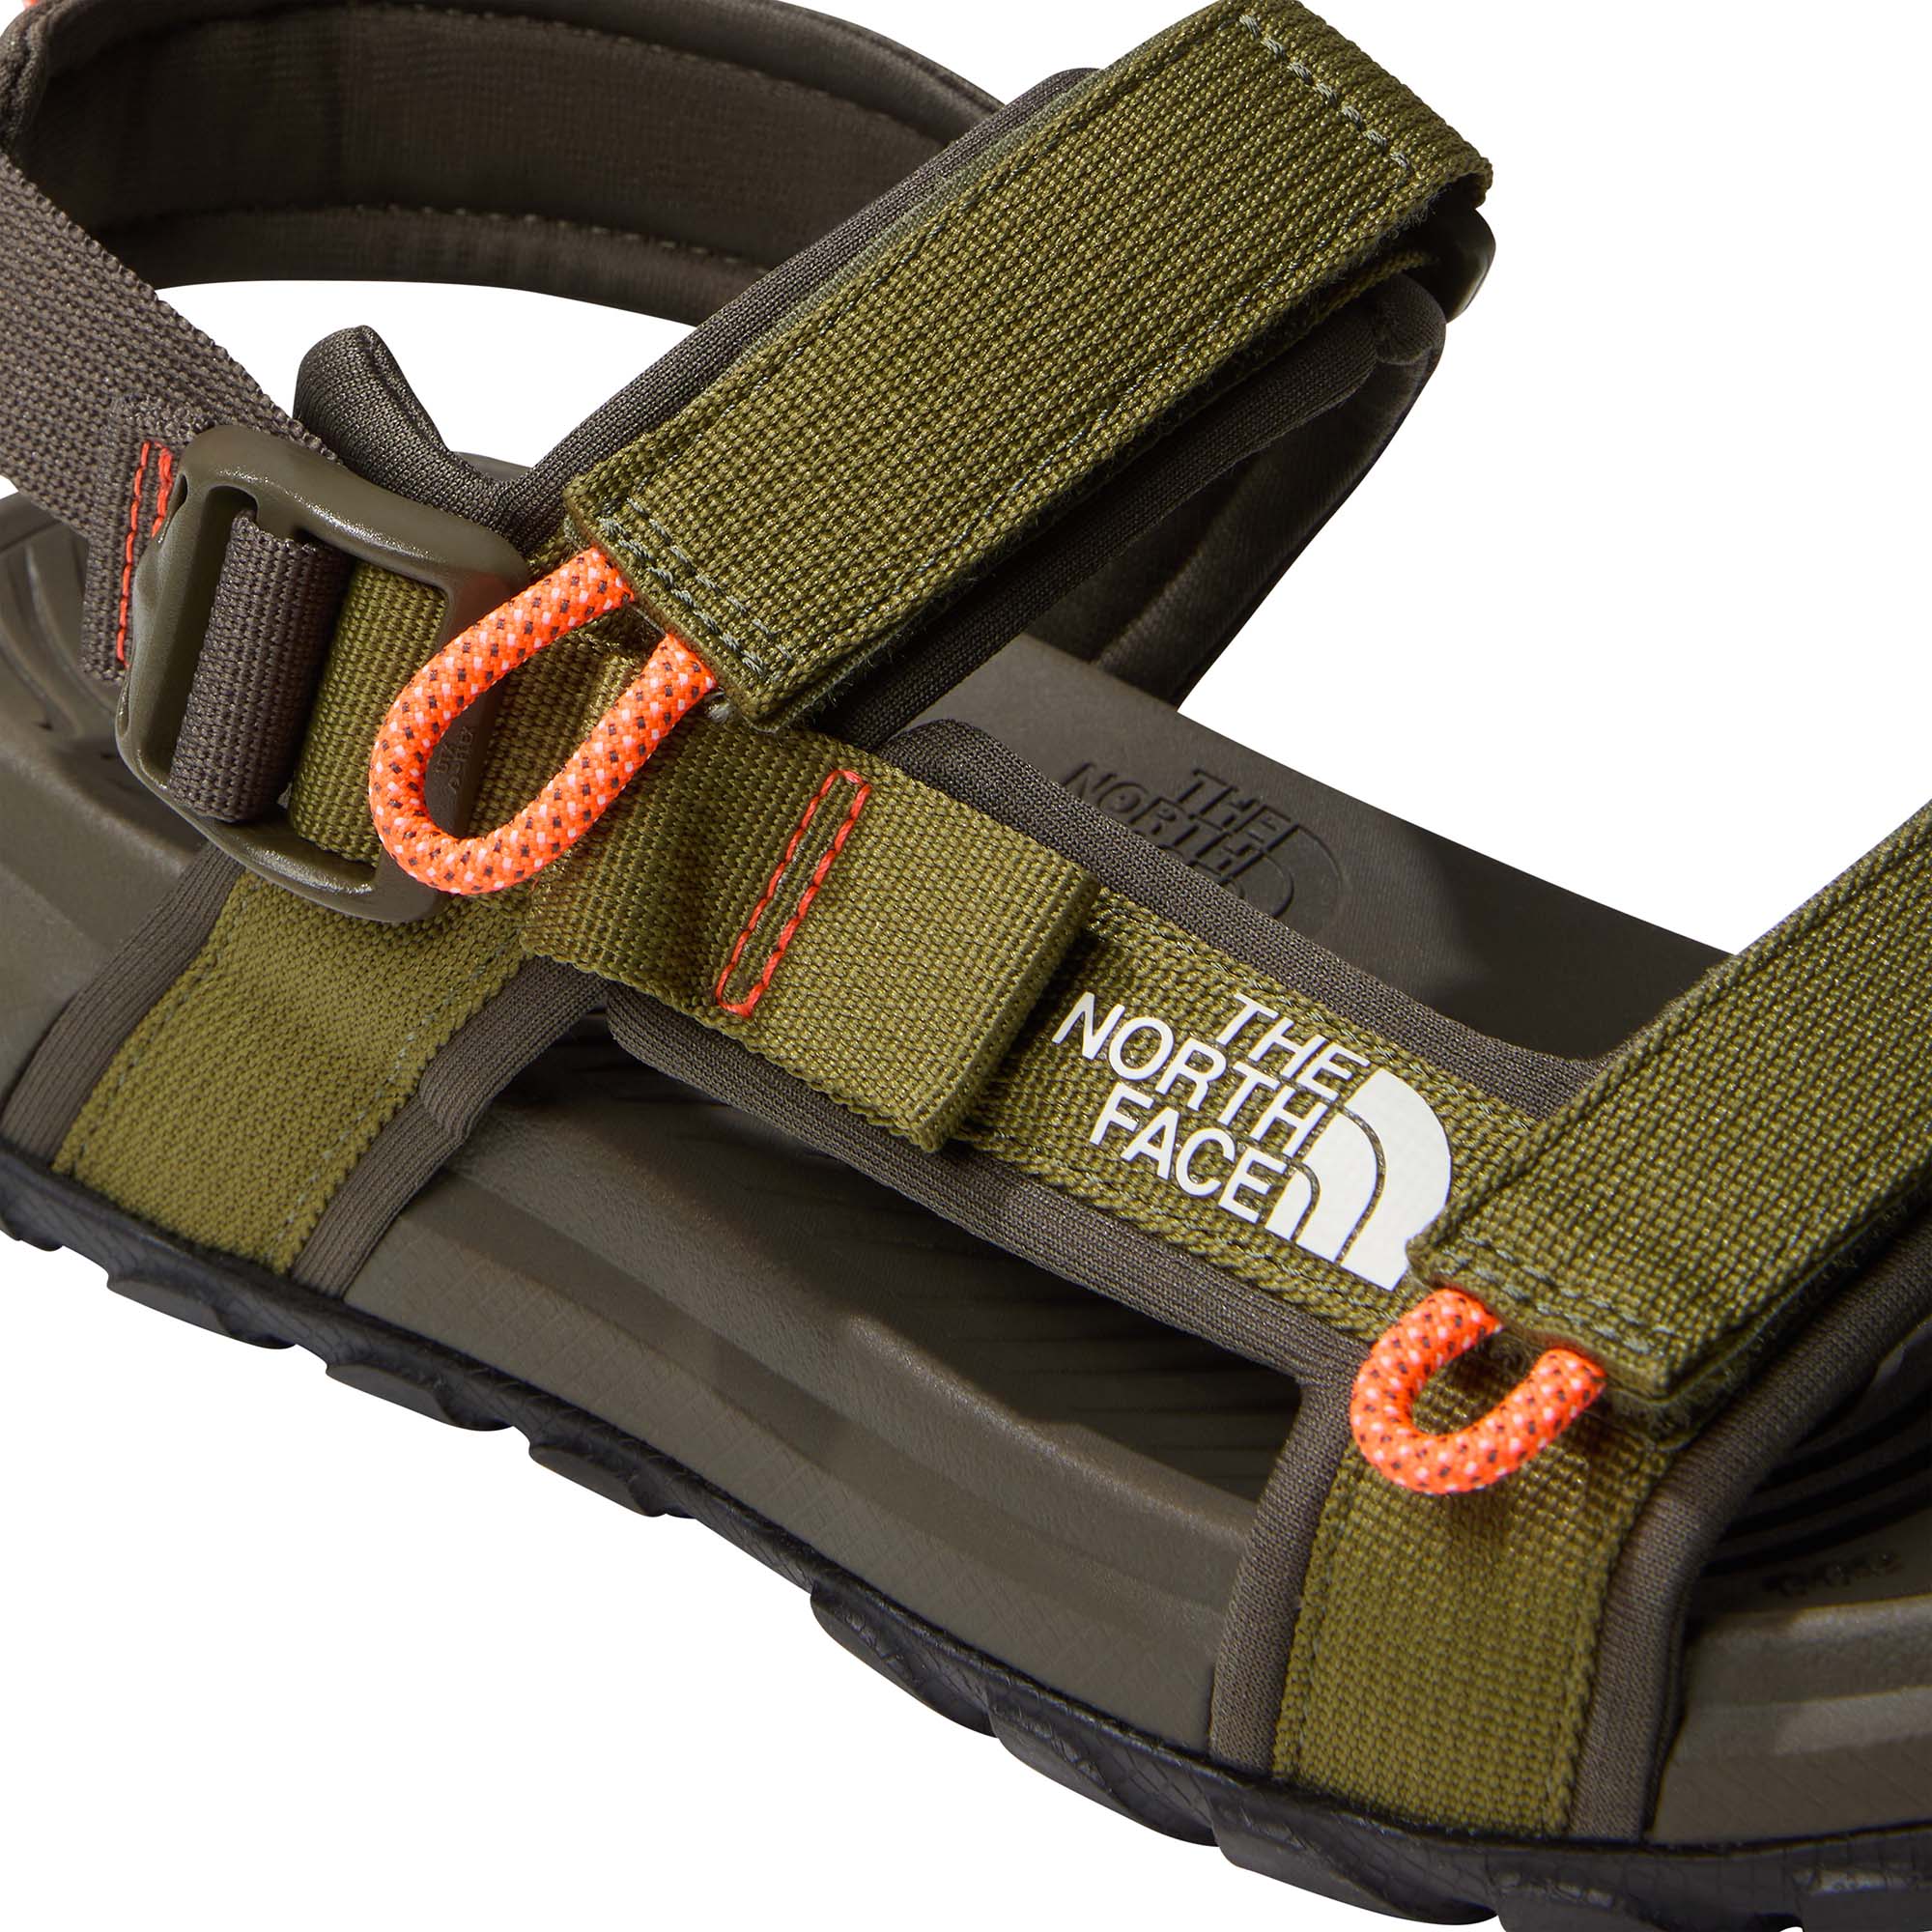 The North Face Explore Camp Hiking Sandals